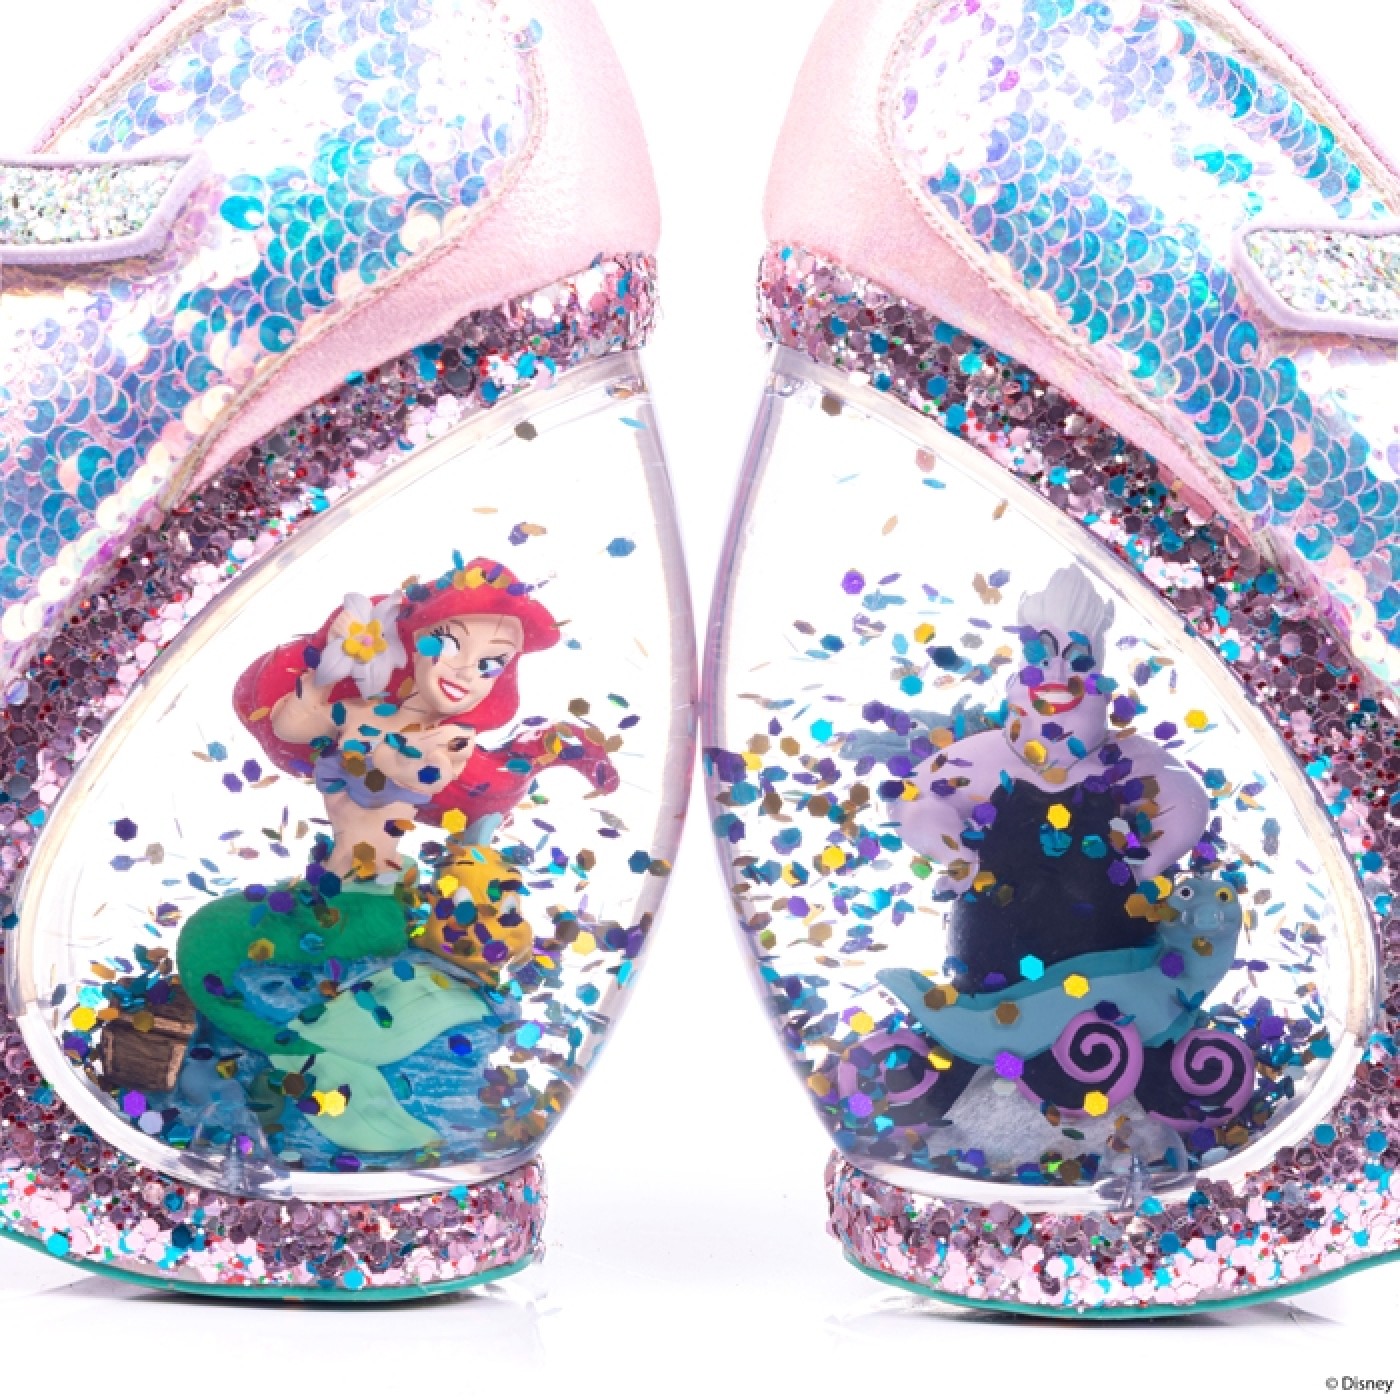 Little Mermaid Boots With Snow Globe Heels Featuring Ariel and Ursula Figurines Inside